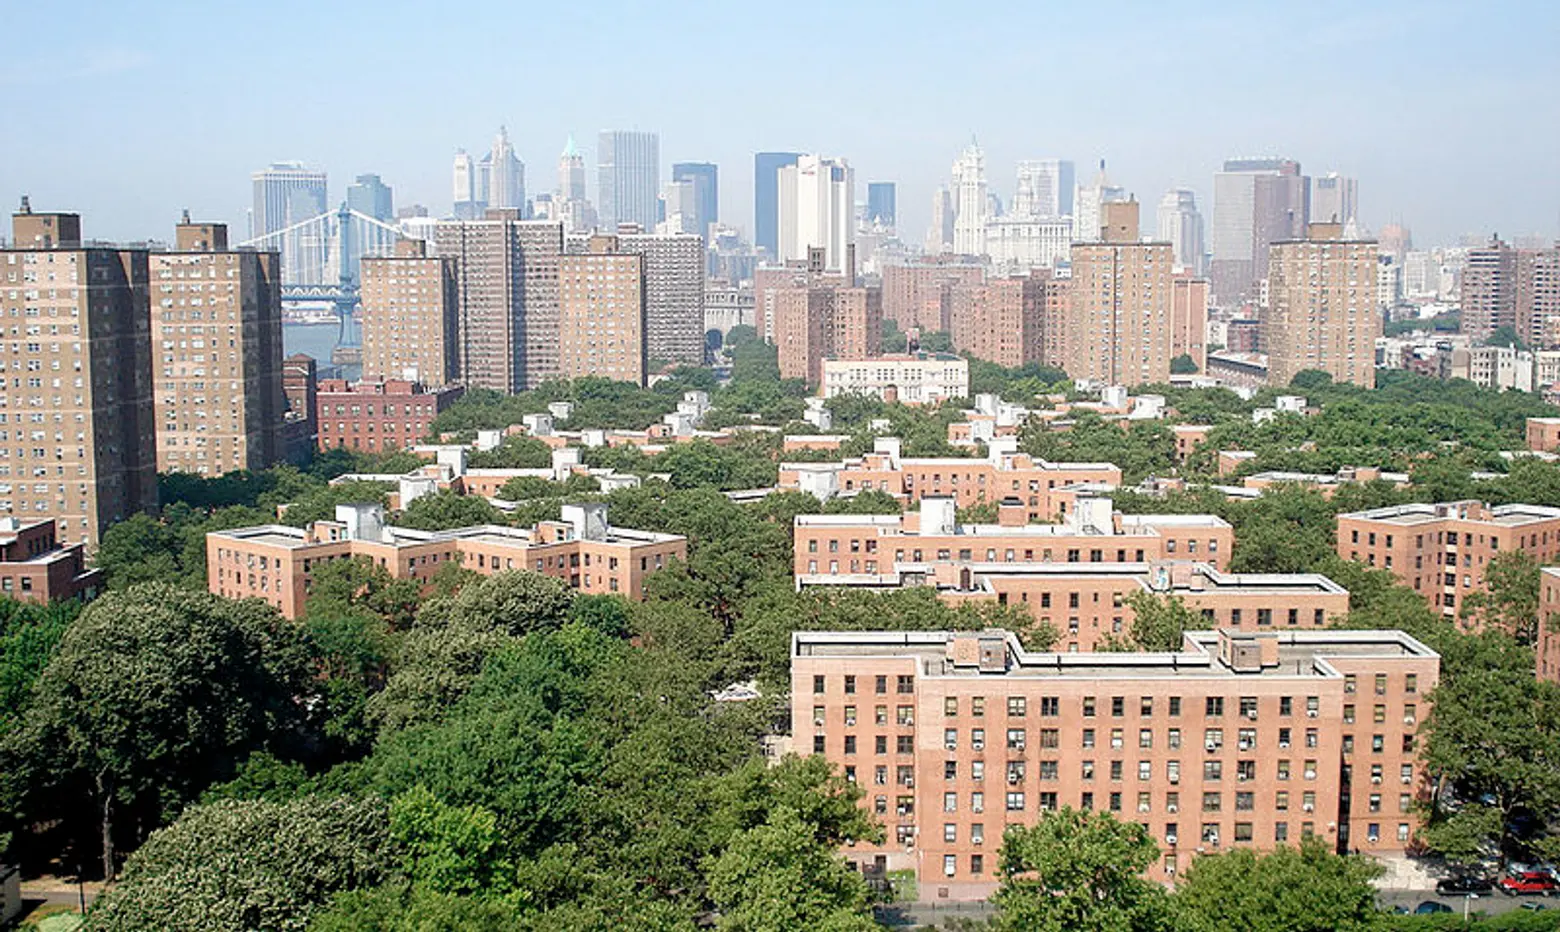 City reaches settlement, agrees to spend $2B on NYCHA improvements after federal probe